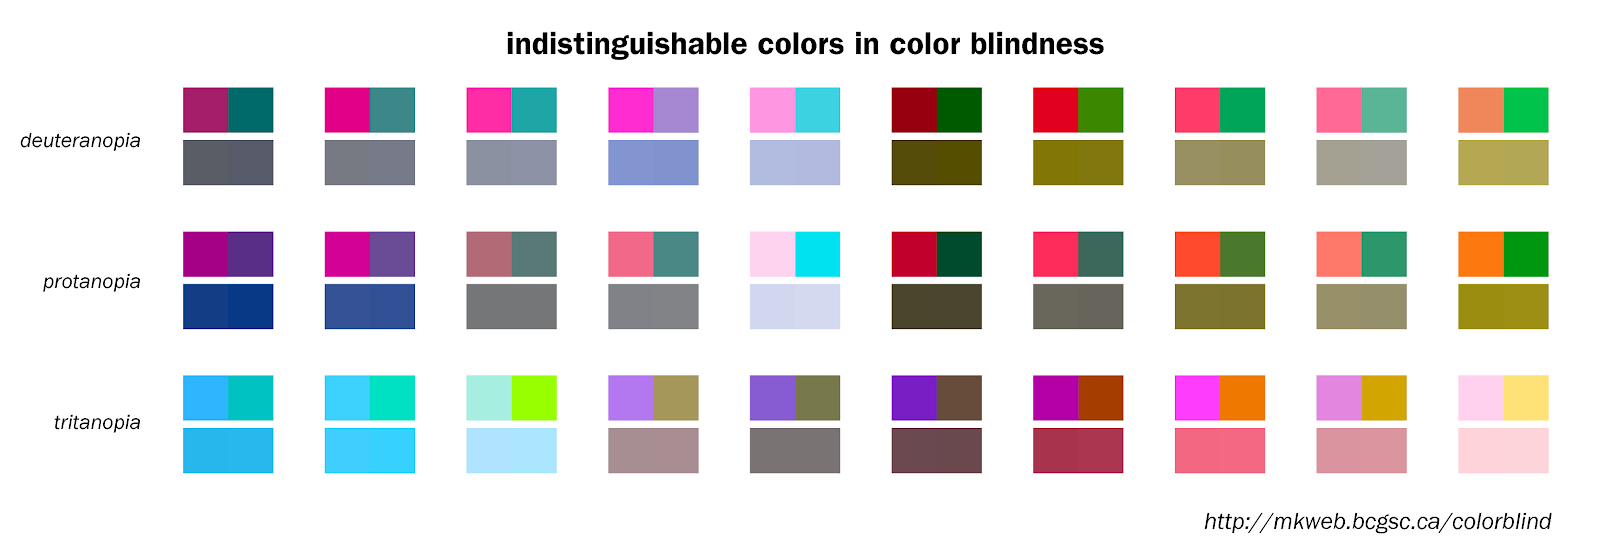 A diagram showing color pairs that are indistinguishable from each other with different types of color blindness.